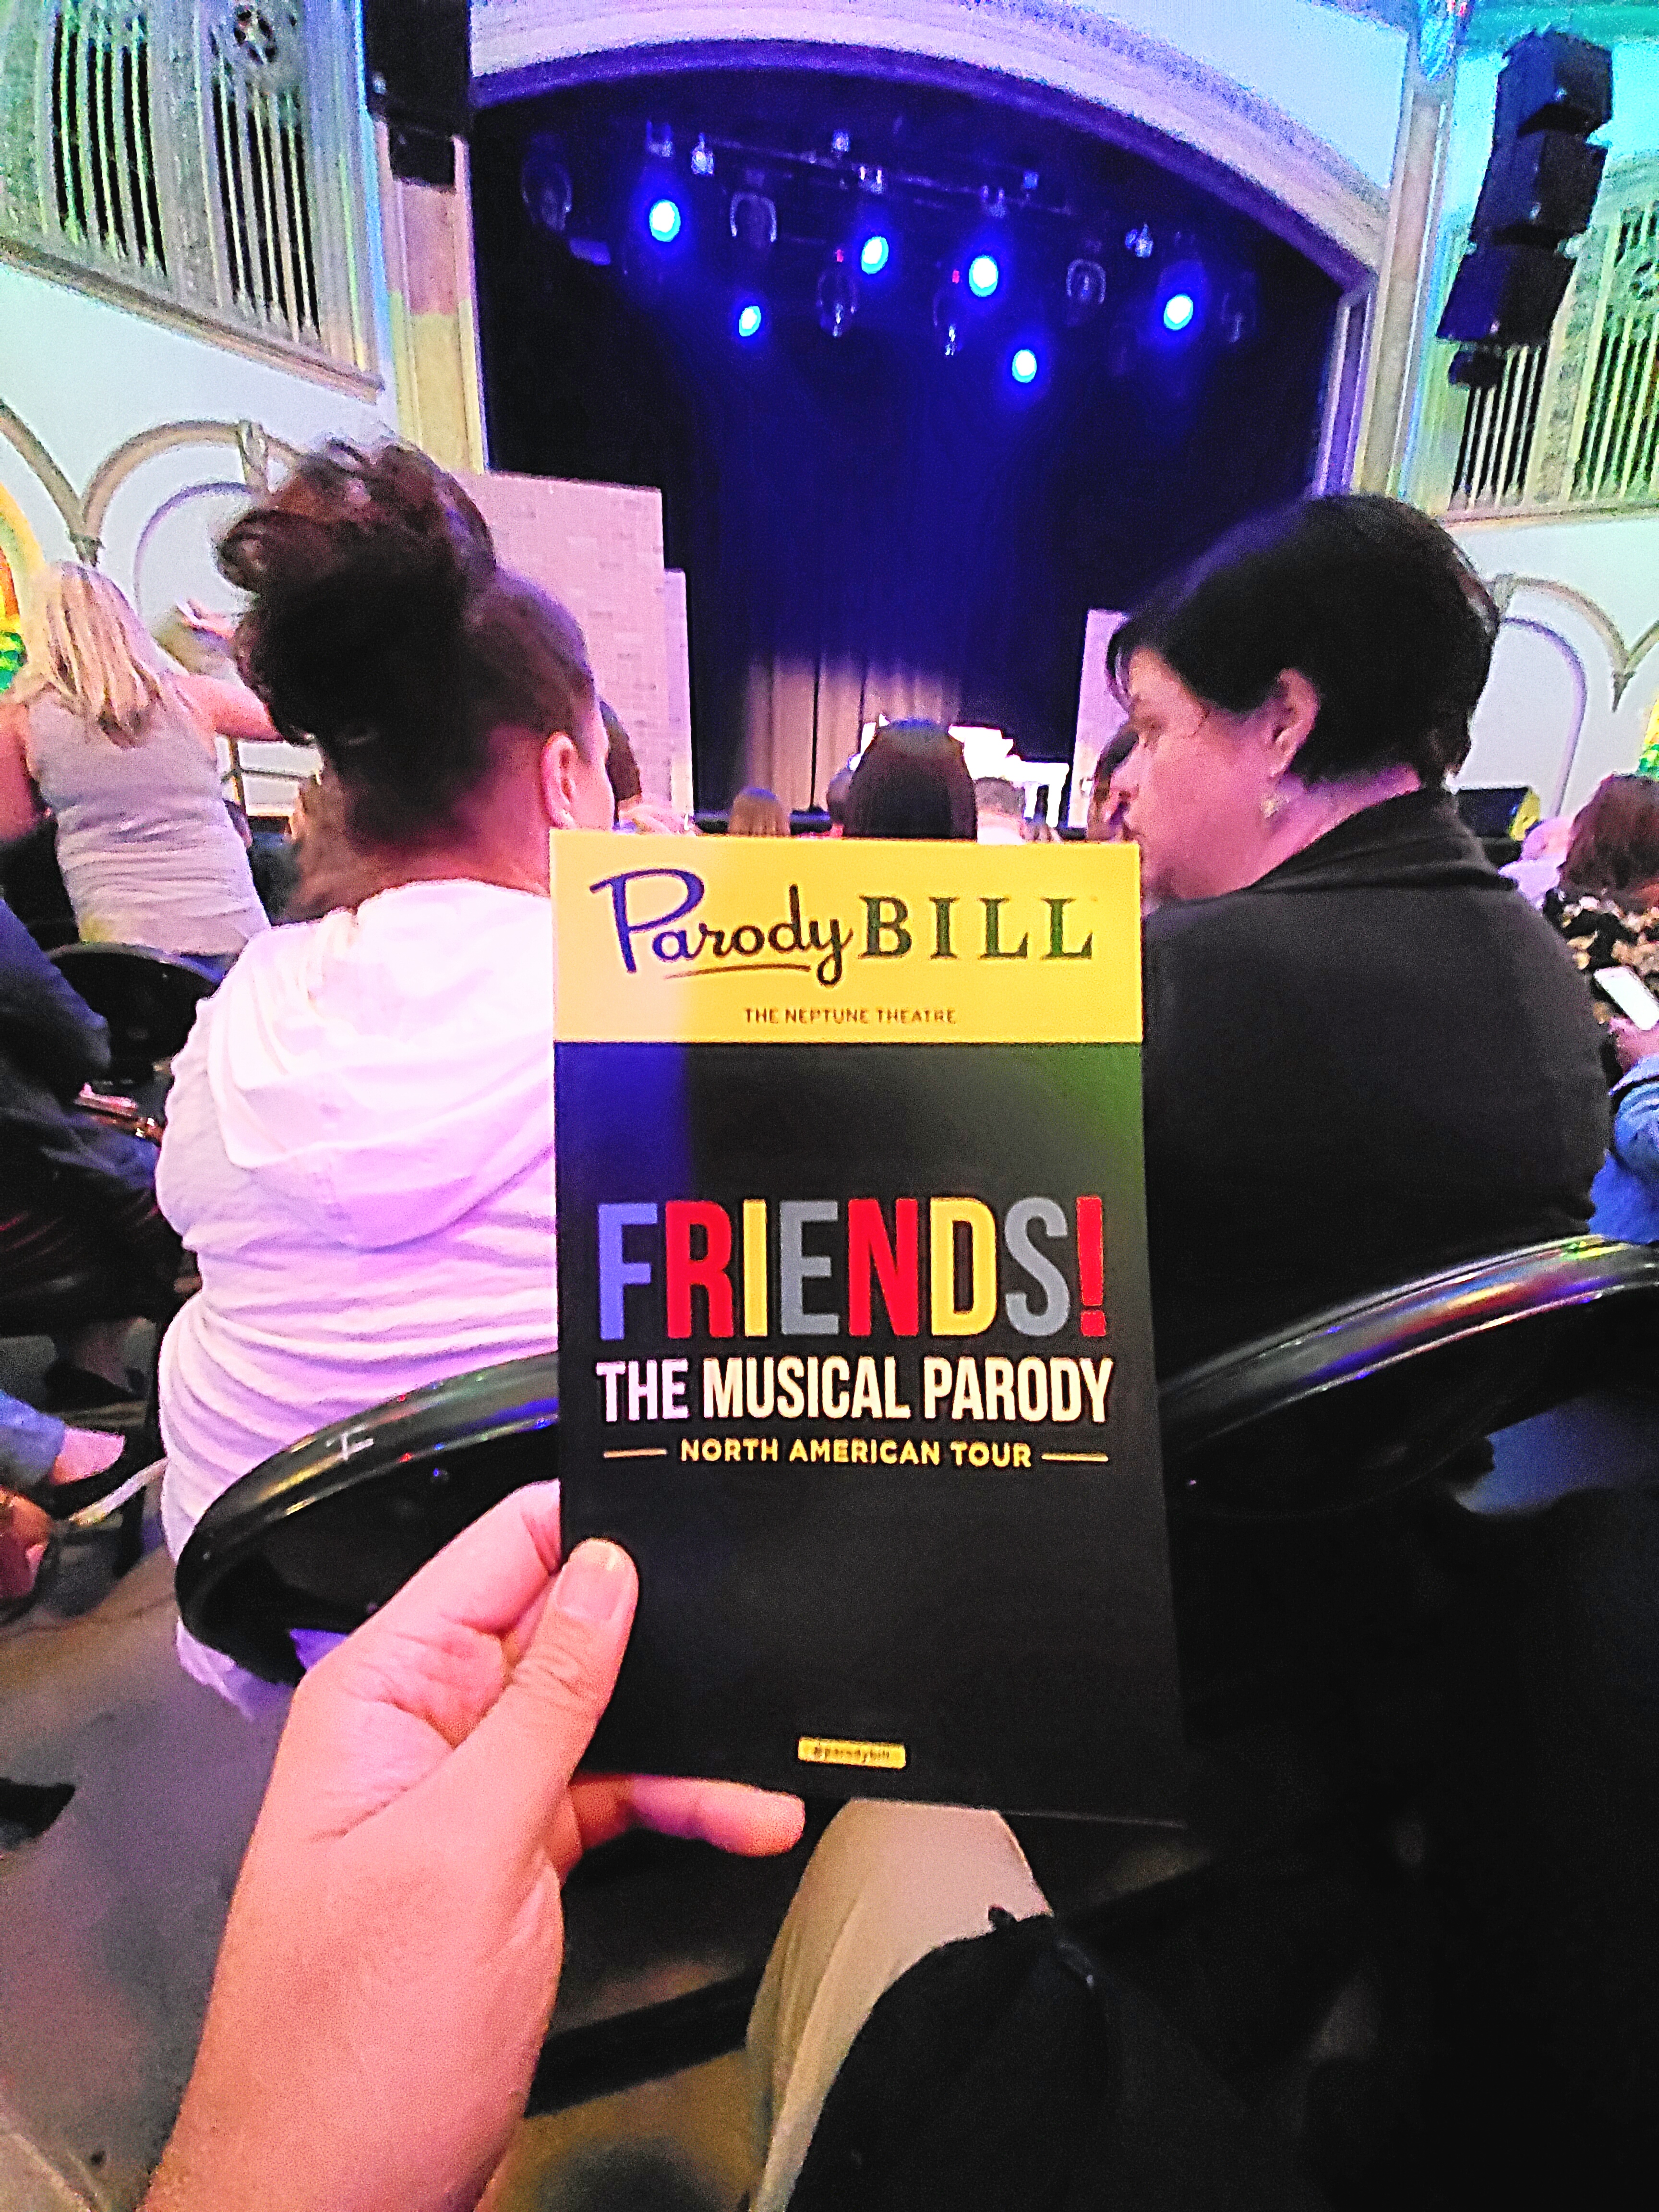 Sold out @FriendsMusicalParody #tour w/ @STGPresents. Venue was general admission ? & too #casual/#grungy. Why not Paramount Theatre? #Hilarious #uncanny impersonations (esp Rachael). @Friends #musical